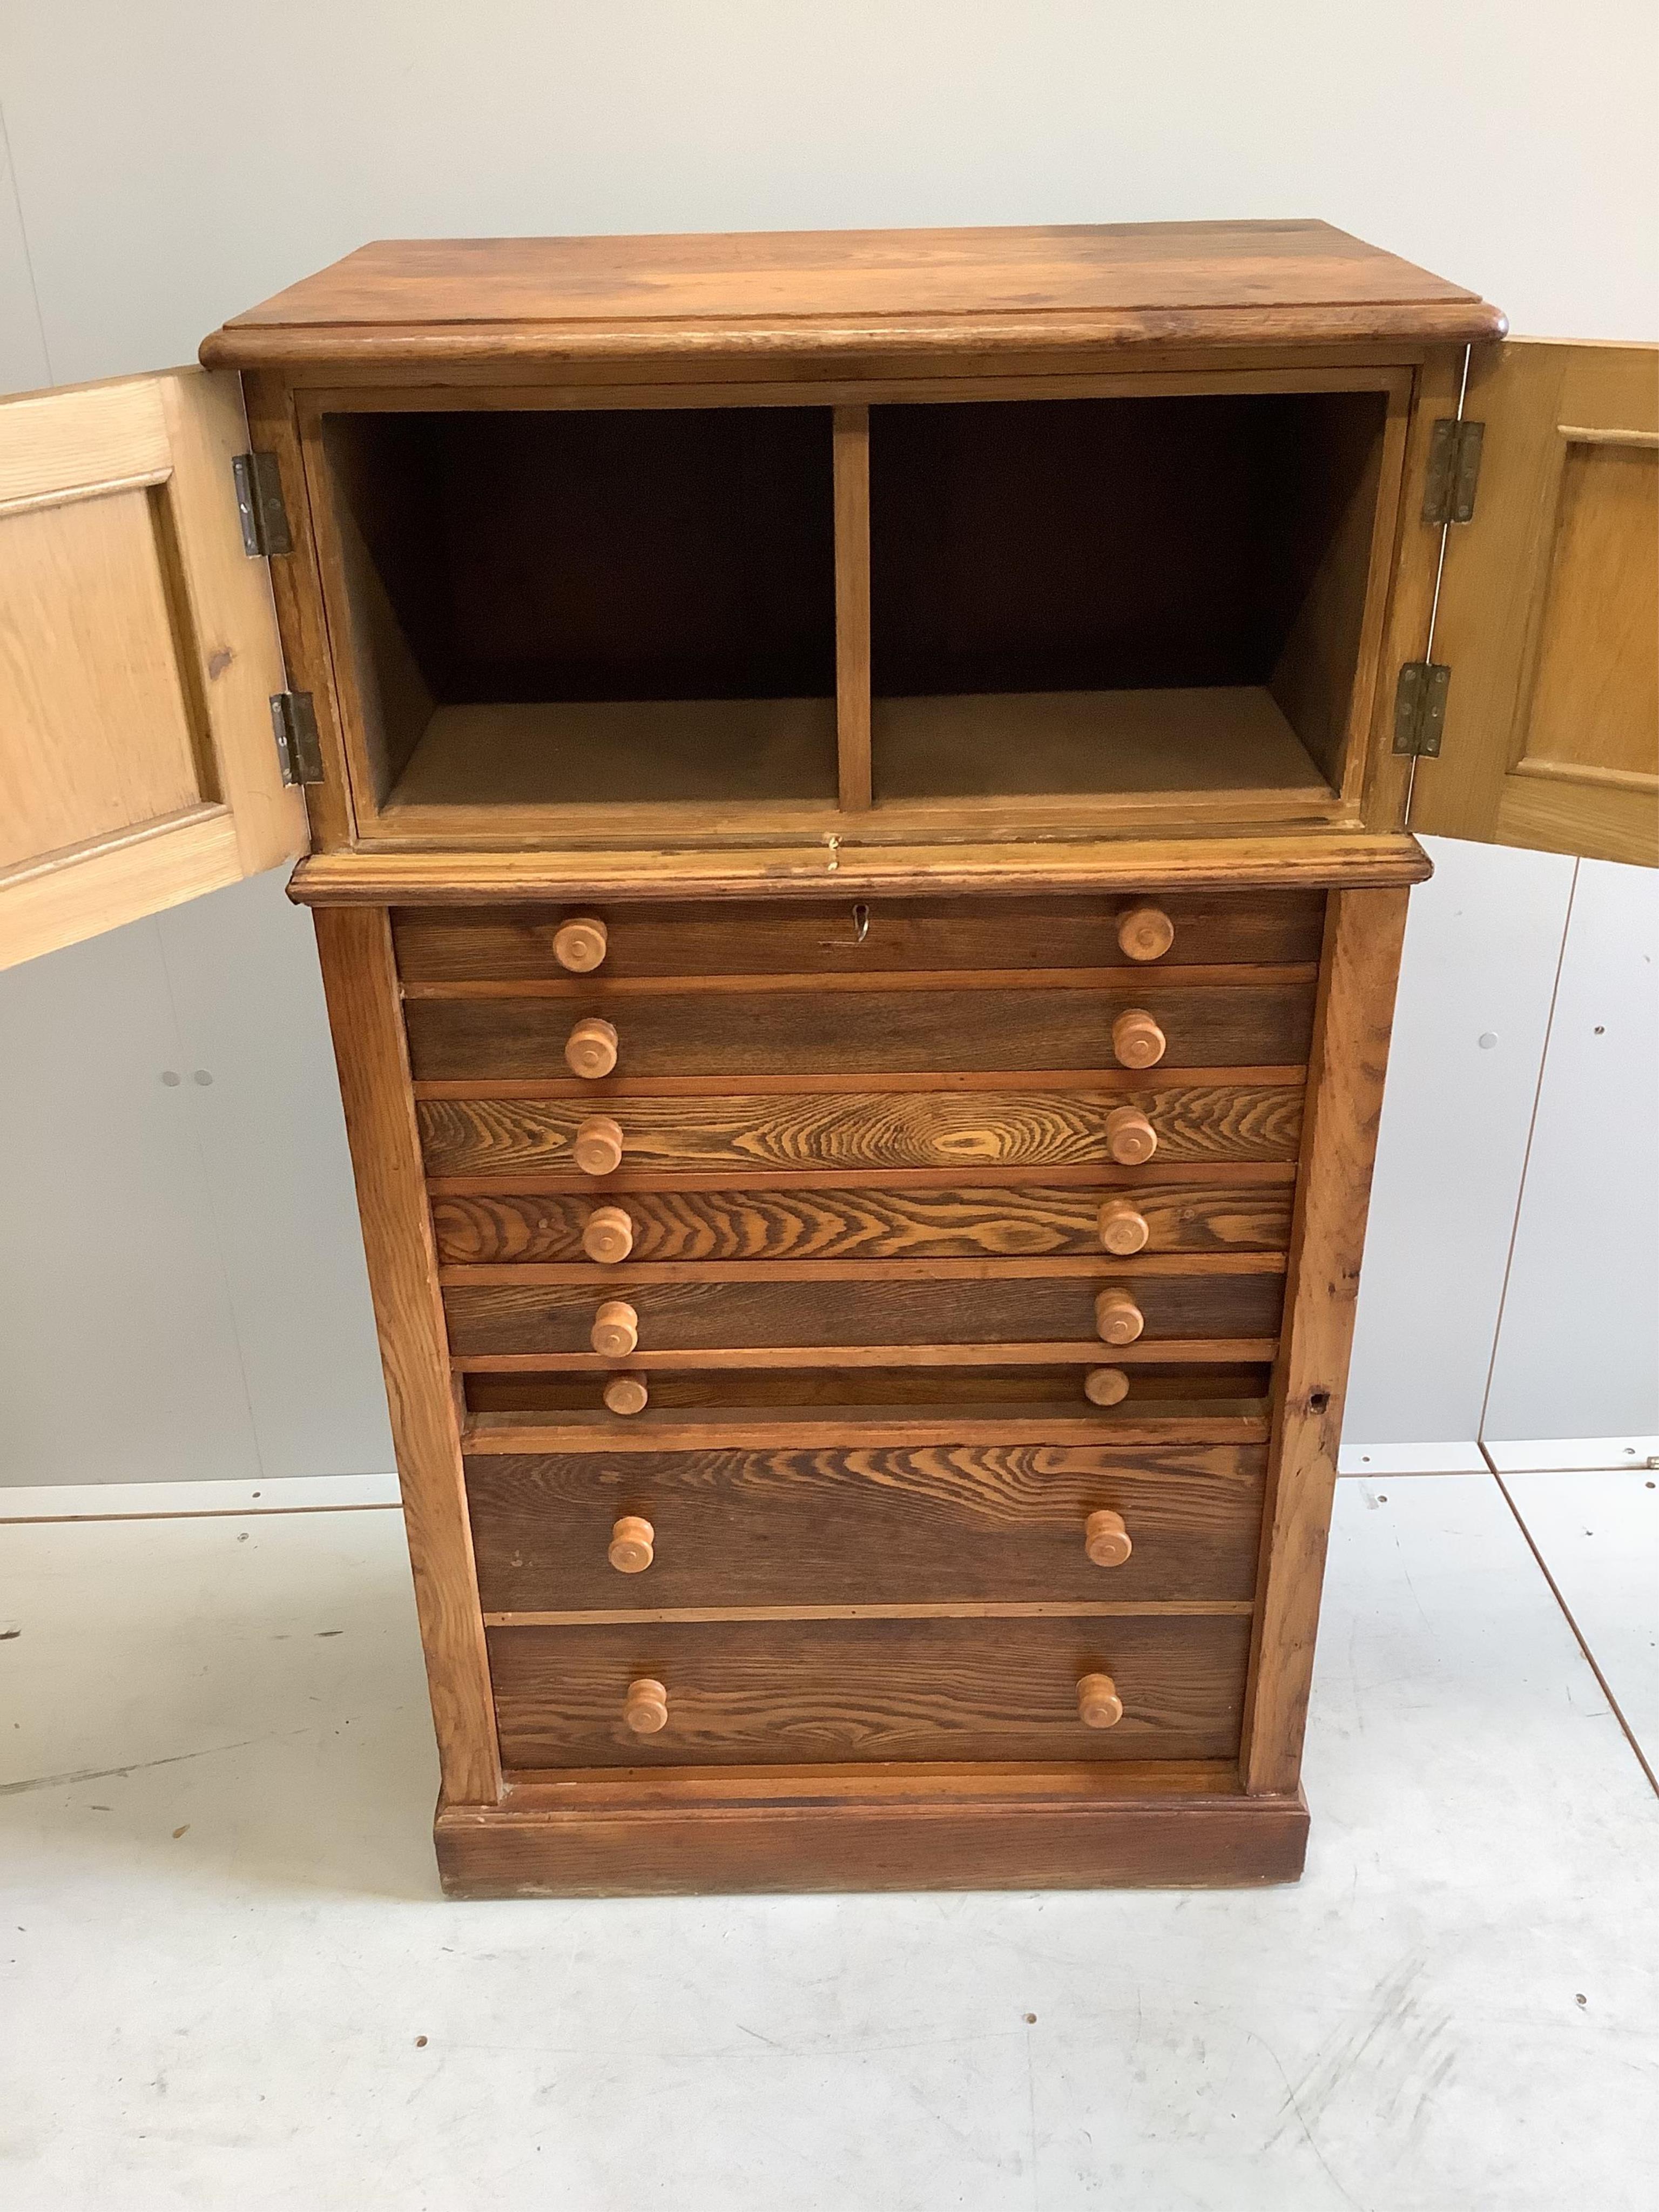 A Victorian style ash collector's chest, width 66cm, depth 40cm, height 113cm. Condition - fair